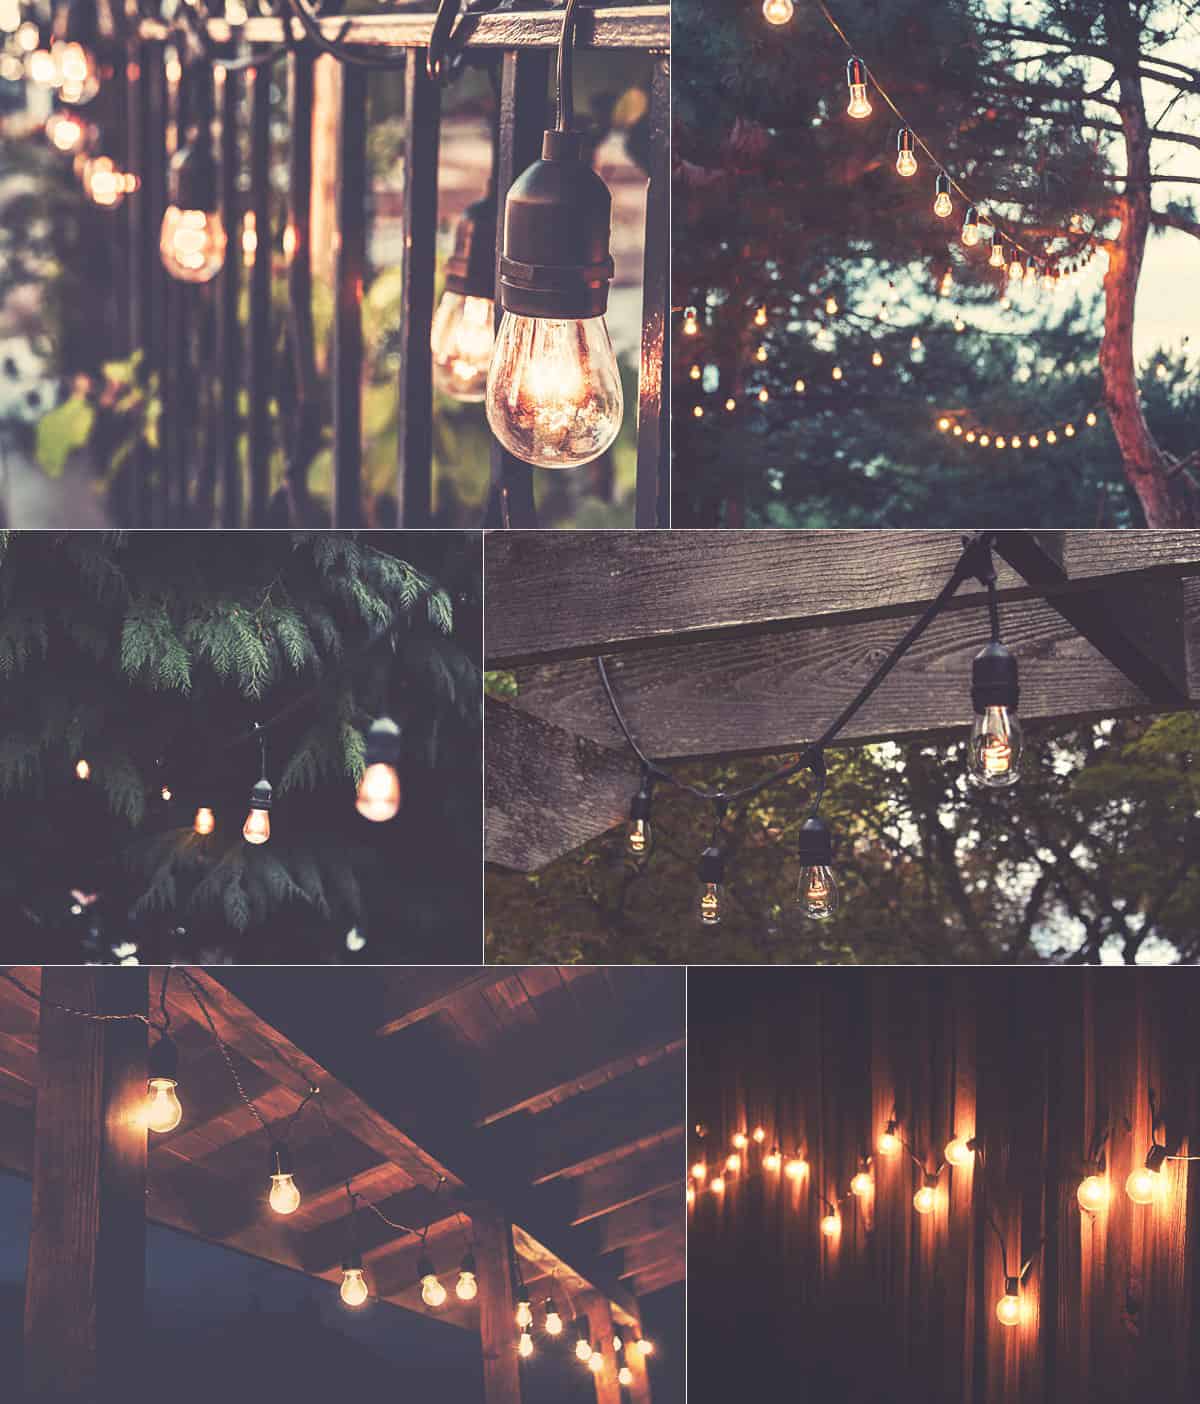 A collage of places to hang globe string lights; including outdoor lighting hanging from a metal fence rail, tress, a pergola, deck, and wooden fence.